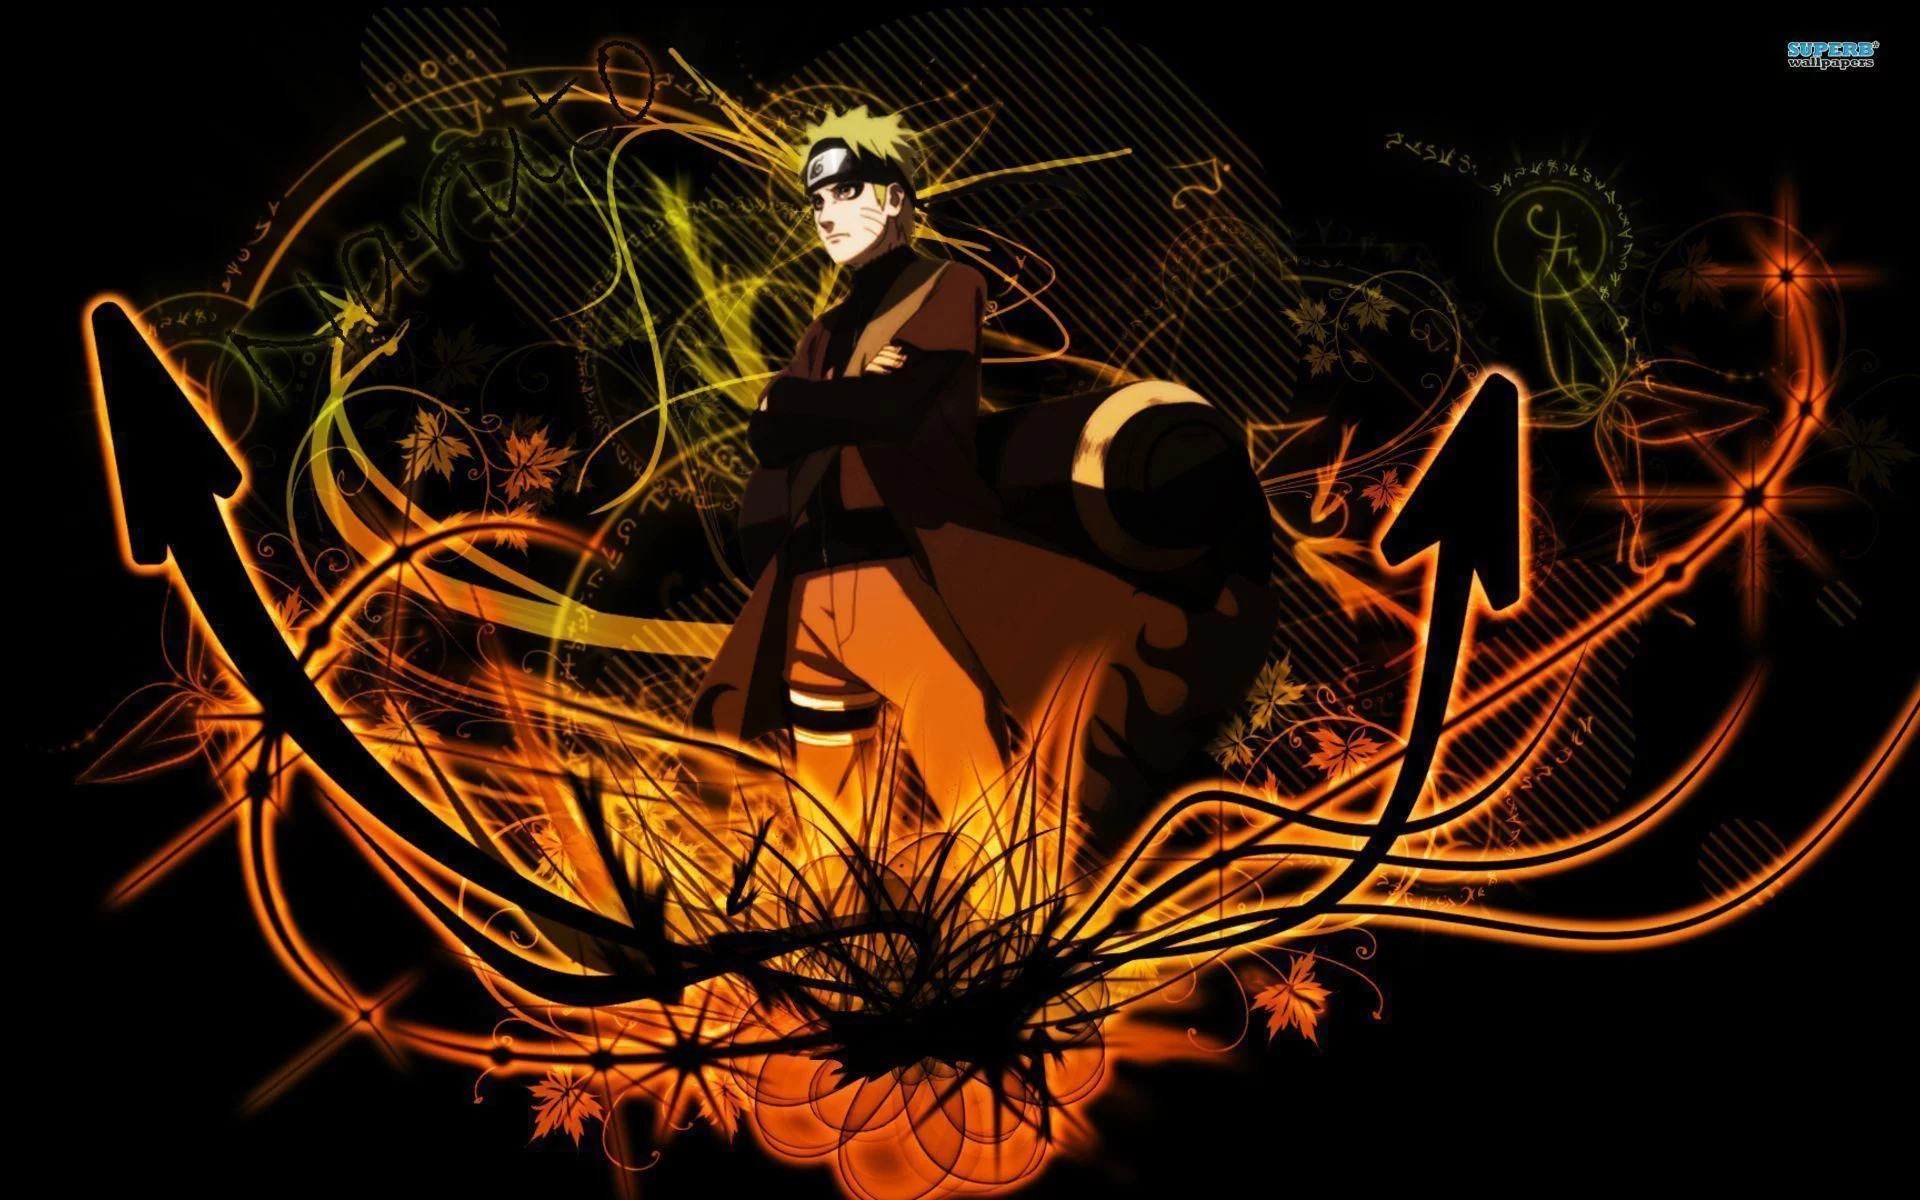 Free Download World Of Warcraft Wallpapers Naruto 1920x1080 Page 58015 (1920 x 1200)